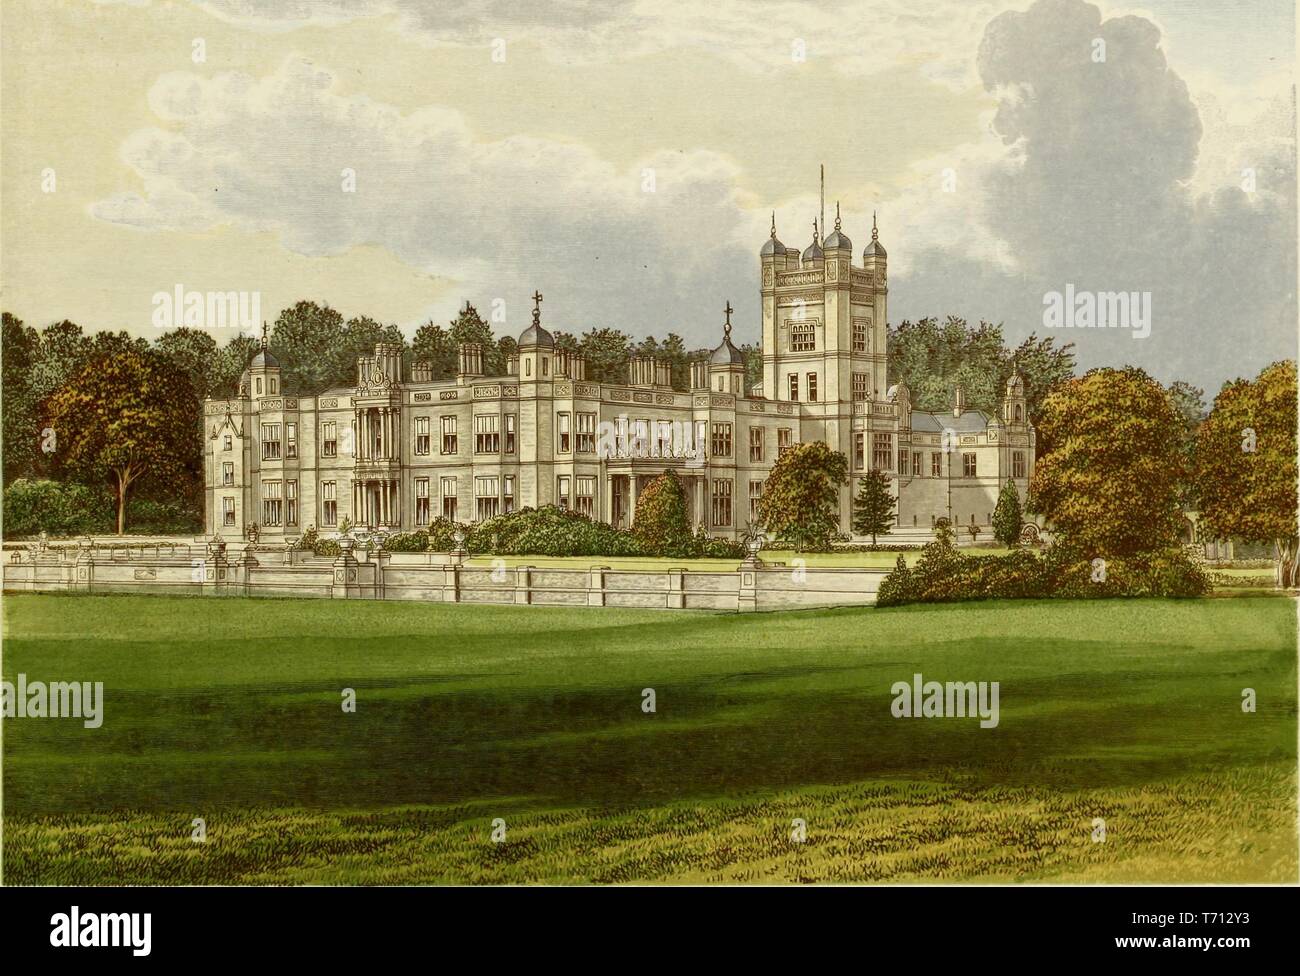 Color print depicting Underley Hall, a large 19th century country house, built in a Jacobean Revival style, and set in a lush, natural landscape, located near Kirkby Lonsdale in Cumbria, published in FO (Francis Orpen) Morris's 'A series of picturesque views of seats of the noblemen and gentlemen of Great Britain and Ireland, with descriptive and historical letterpress', 1840. Courtesy Internet Archive. () Stock Photo